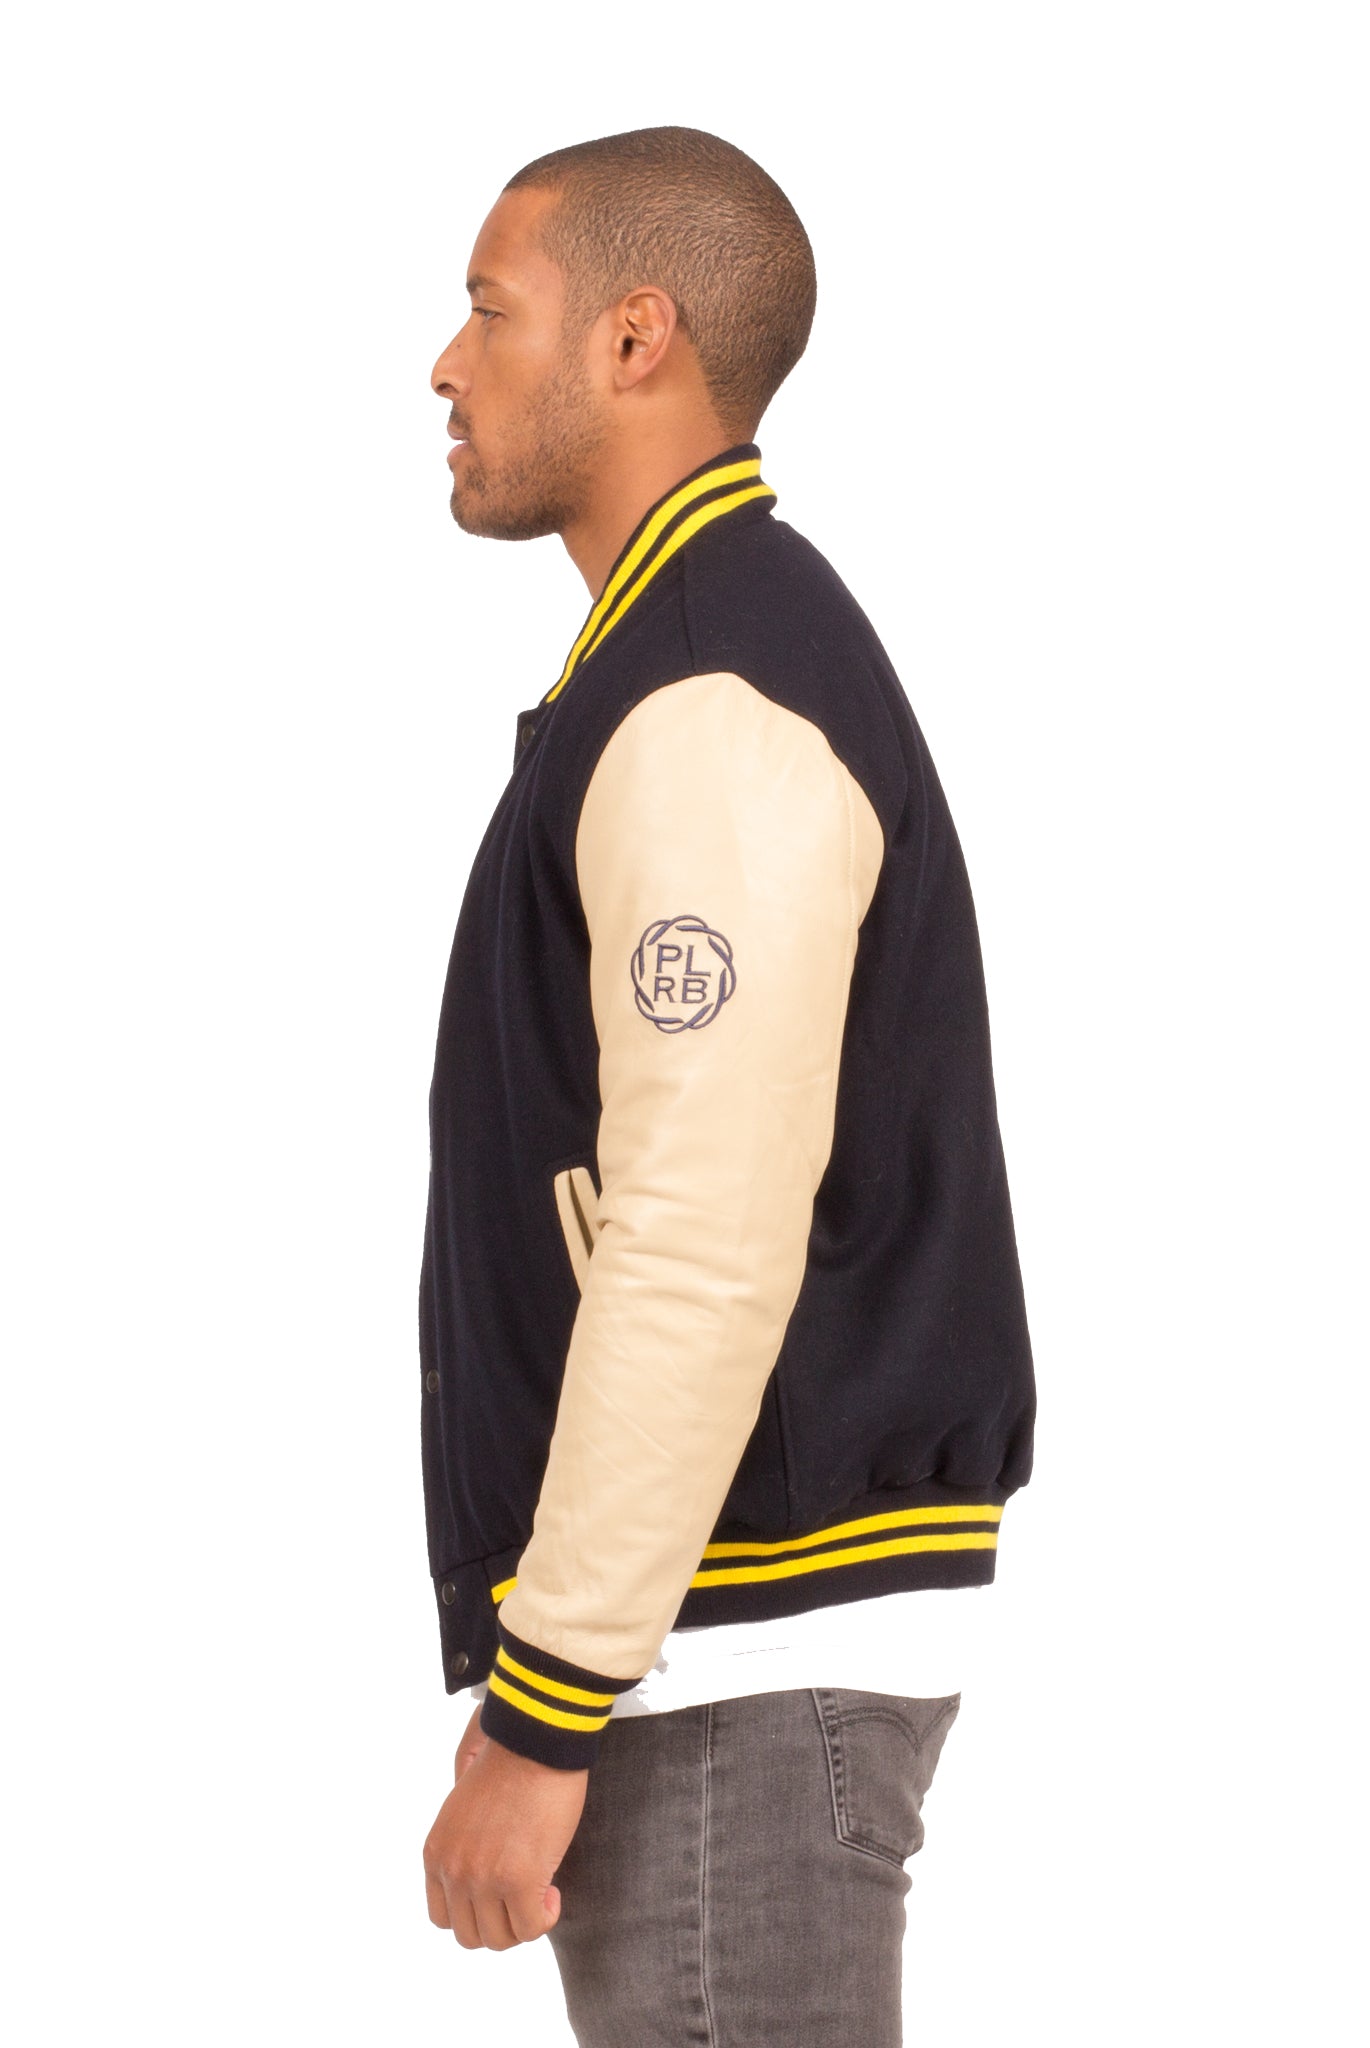 ALL CITY VARSITY JACKET IN NAVY BLUE | Poor Little Rich Boy Clothing